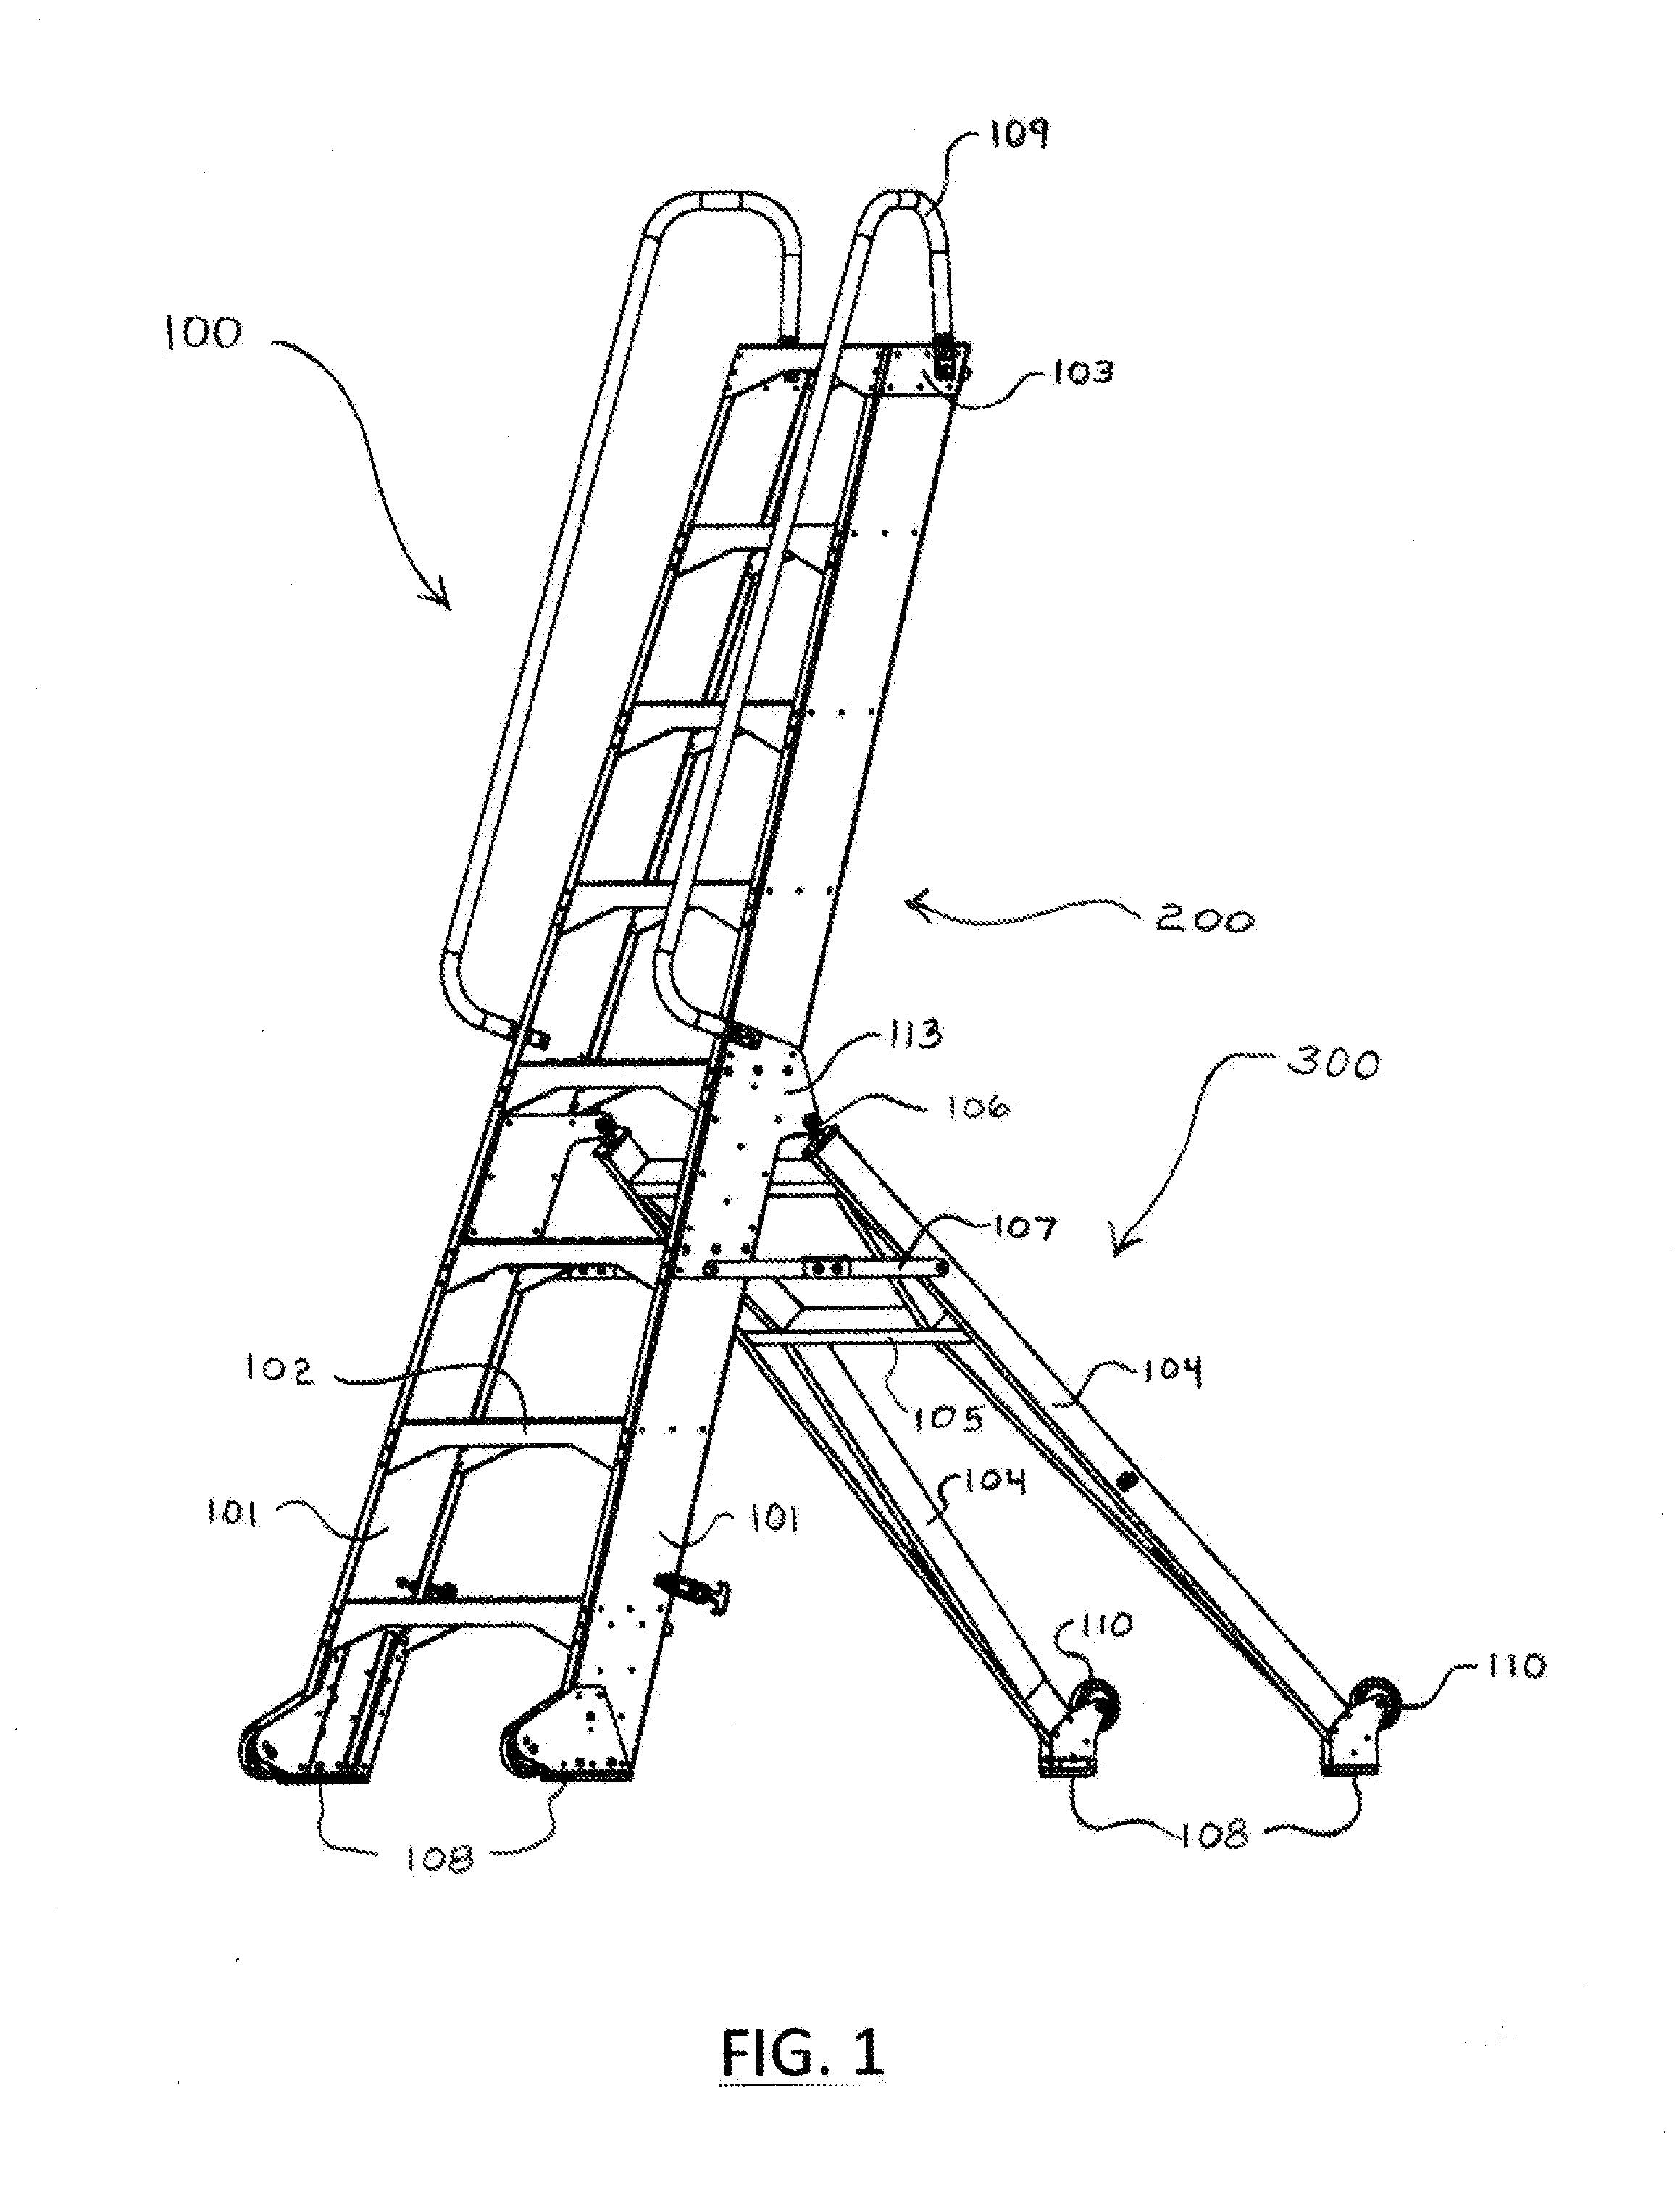 Safety ladder and work platform for helicopter and aircraft maintenence